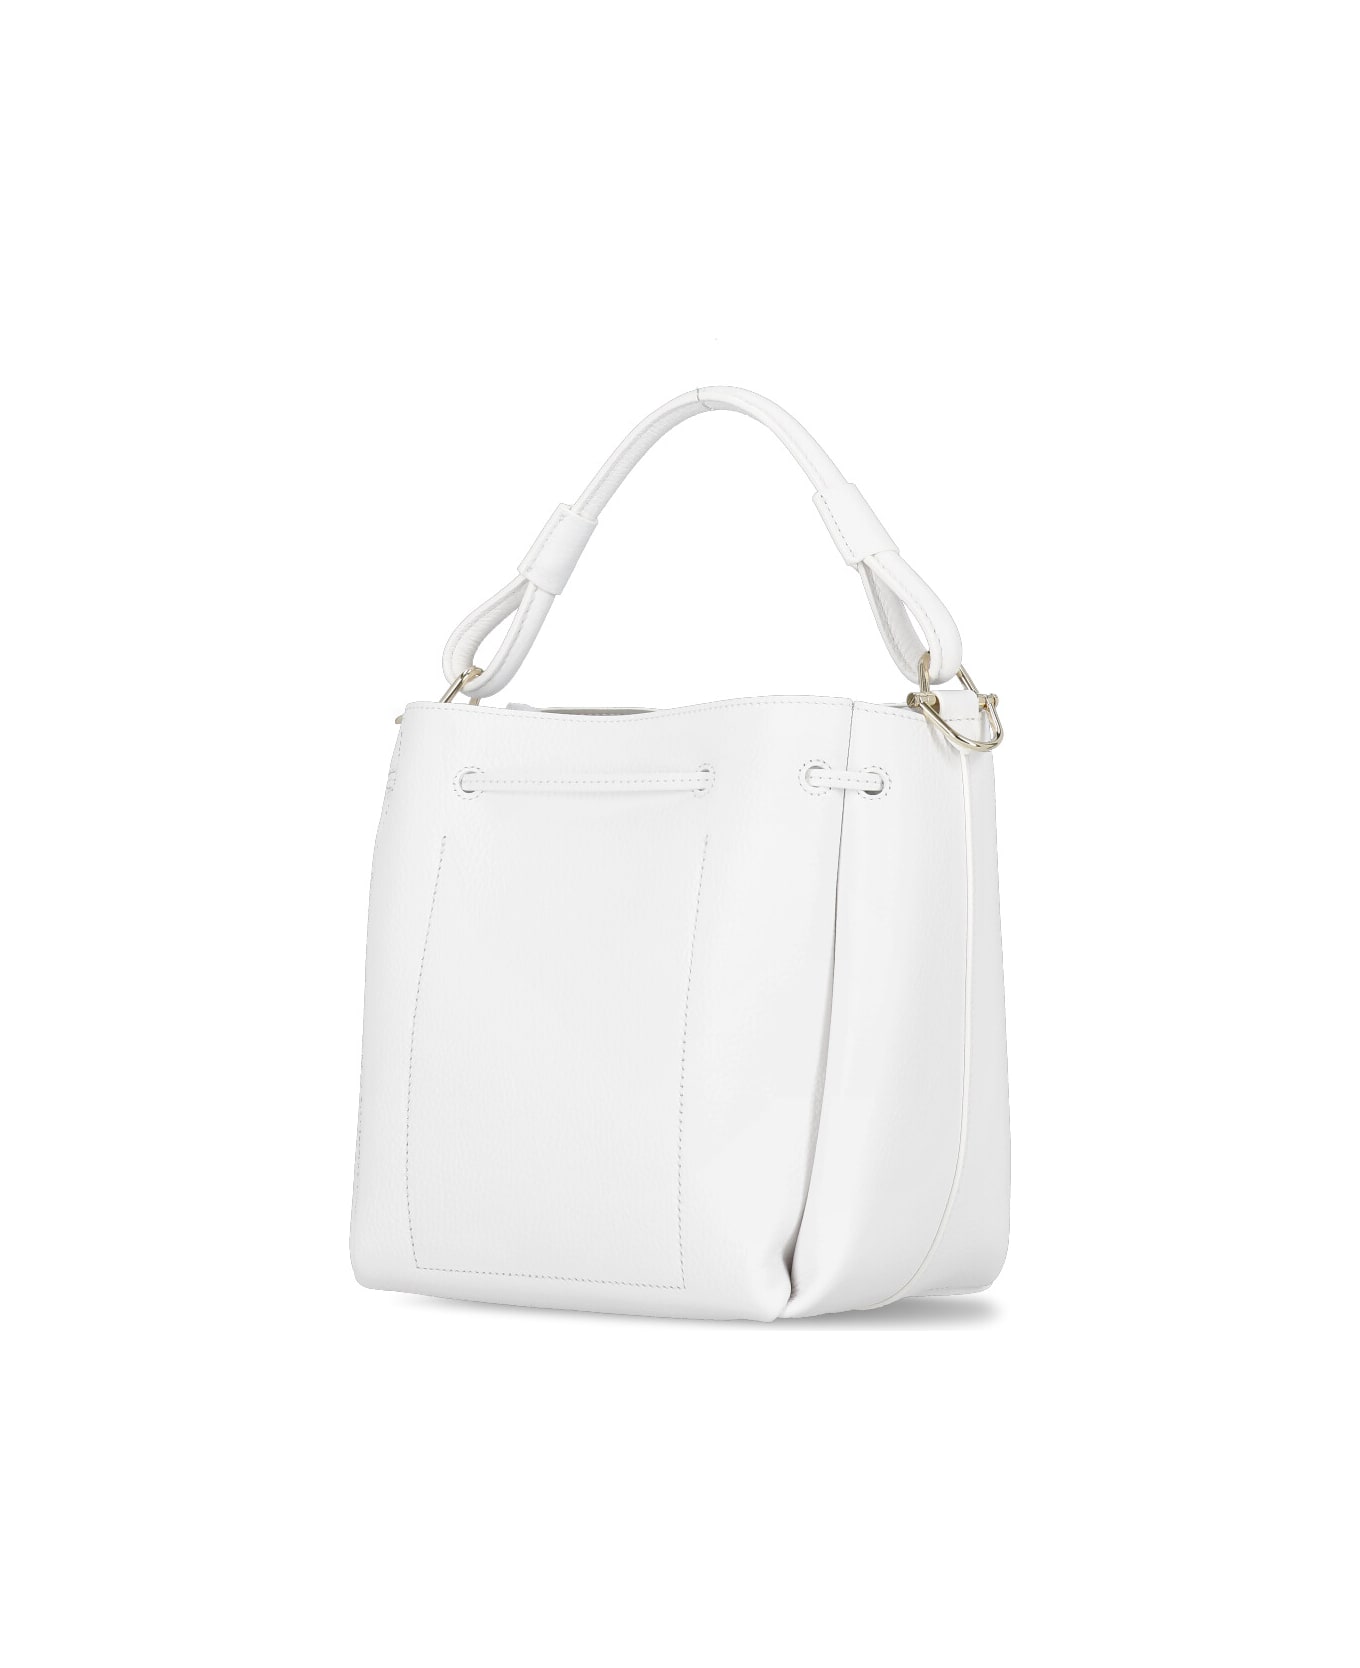 Coccinelle Eclips Hand Bag - White